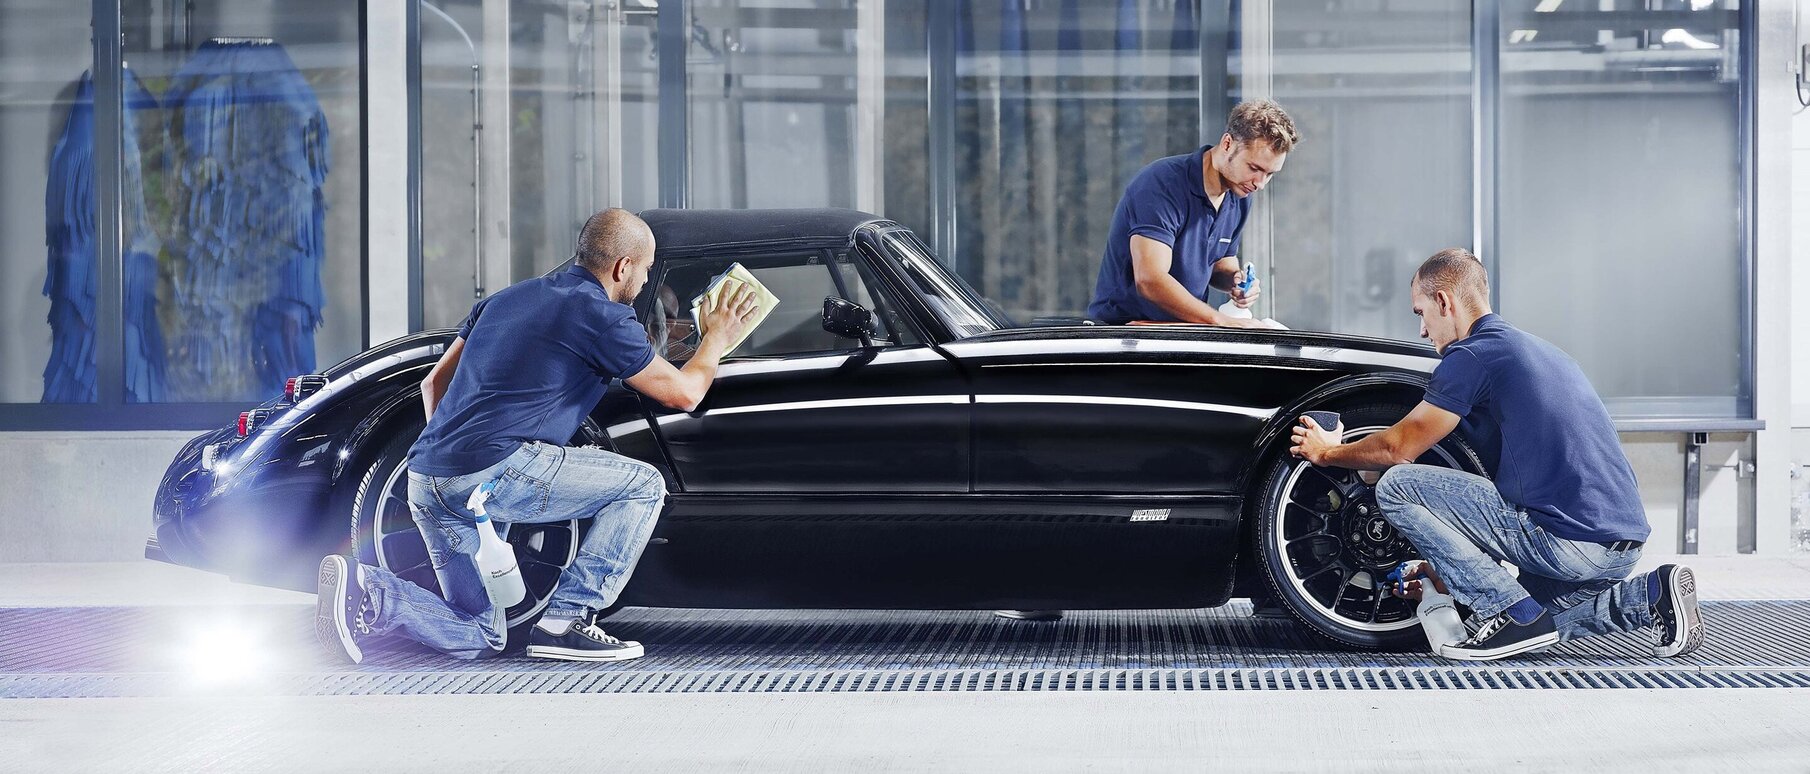 Employees clean a luxury car by hand in the car wash